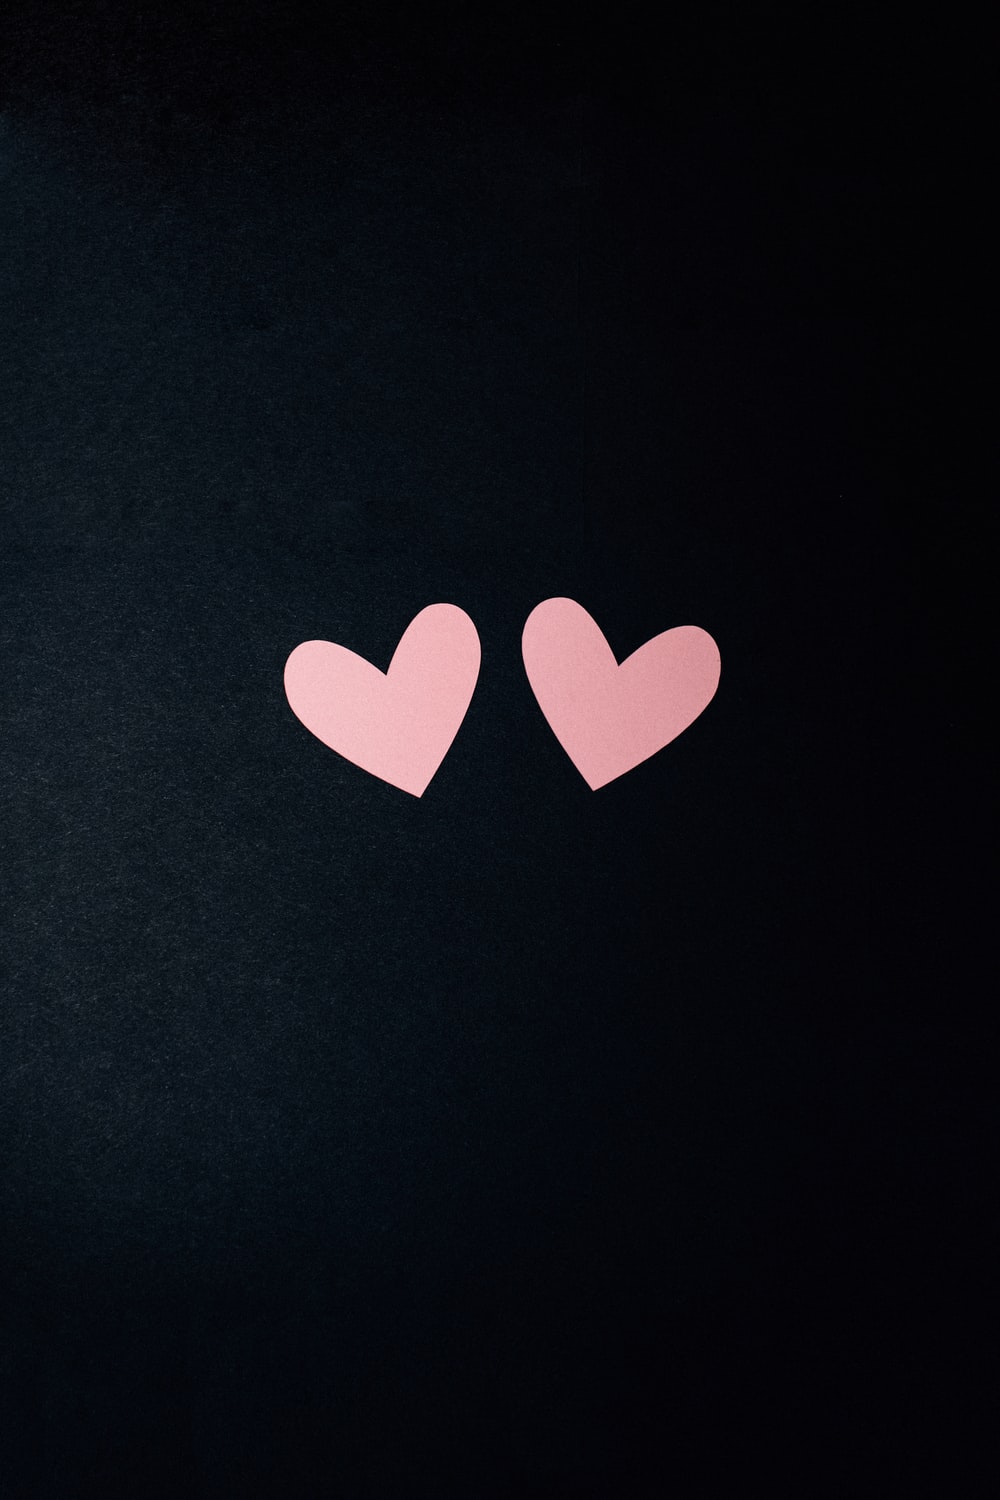 Heart Picture [HD]. Download Free Image